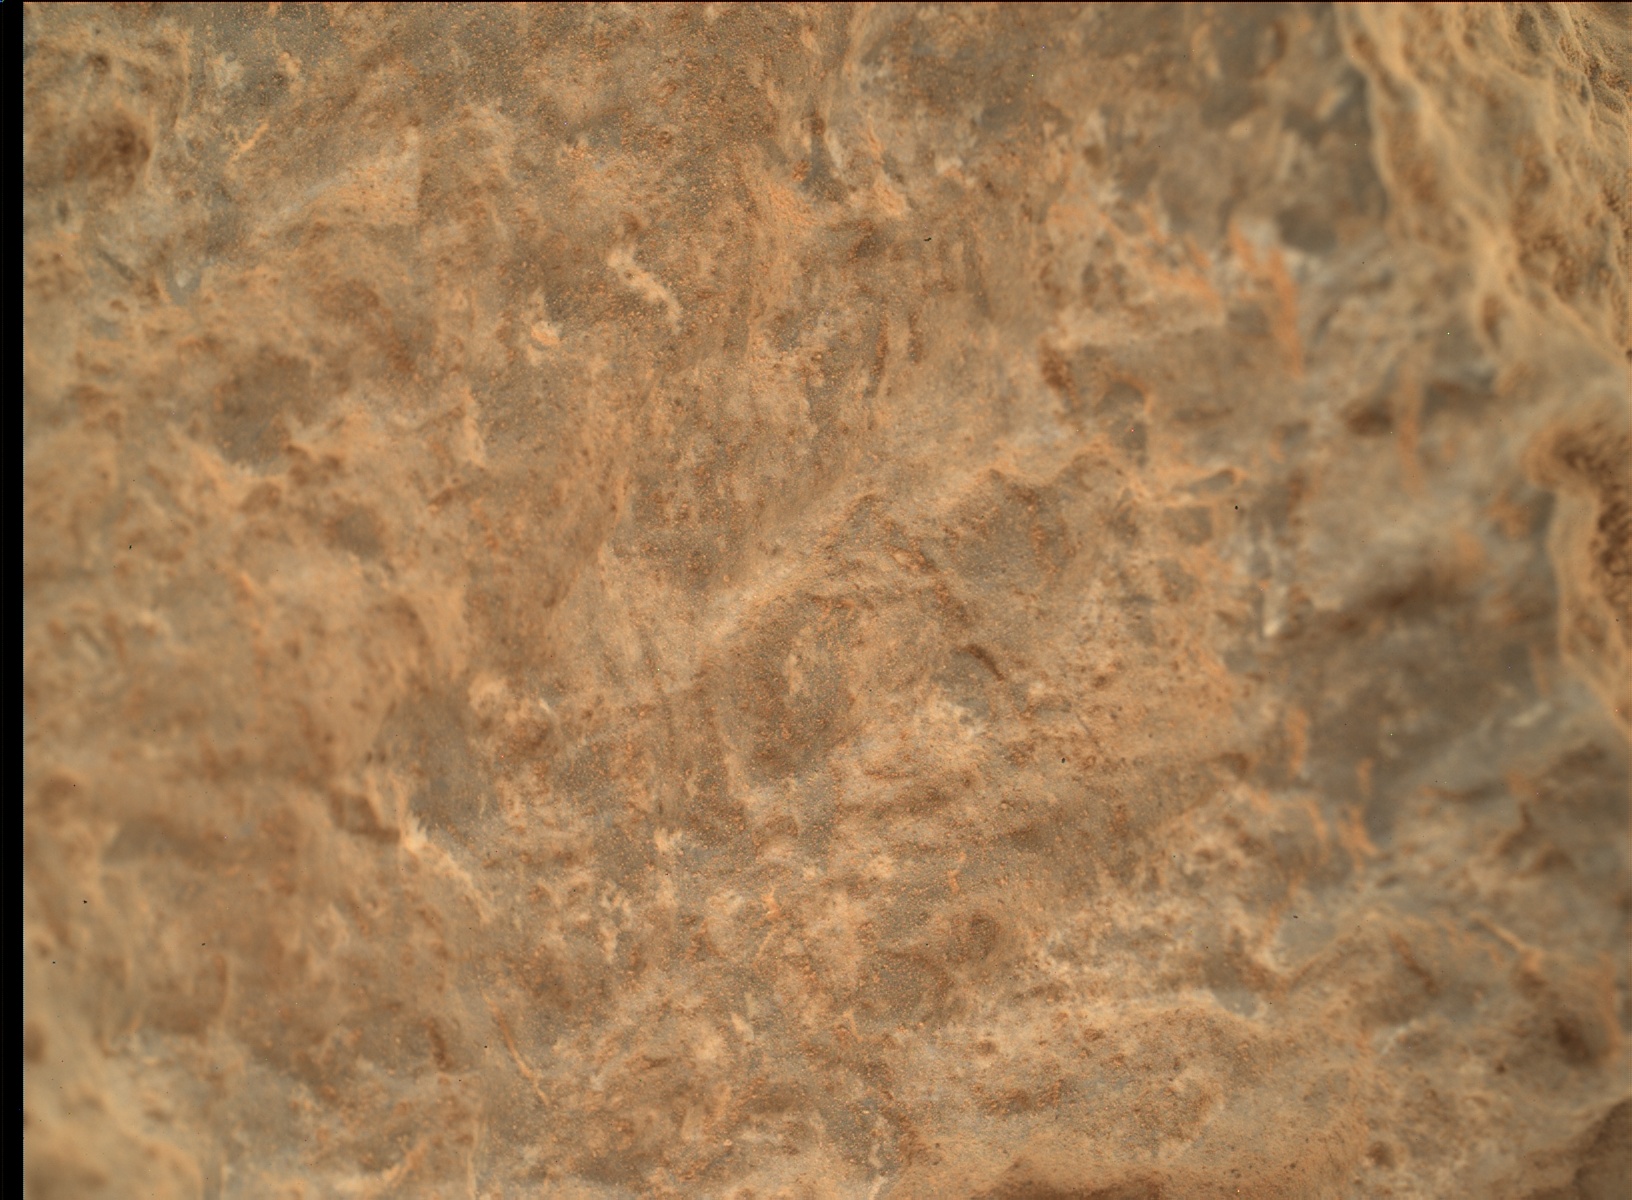 Nasa's Mars rover Curiosity acquired this image using its Mars Hand Lens Imager (MAHLI) on Sol 526